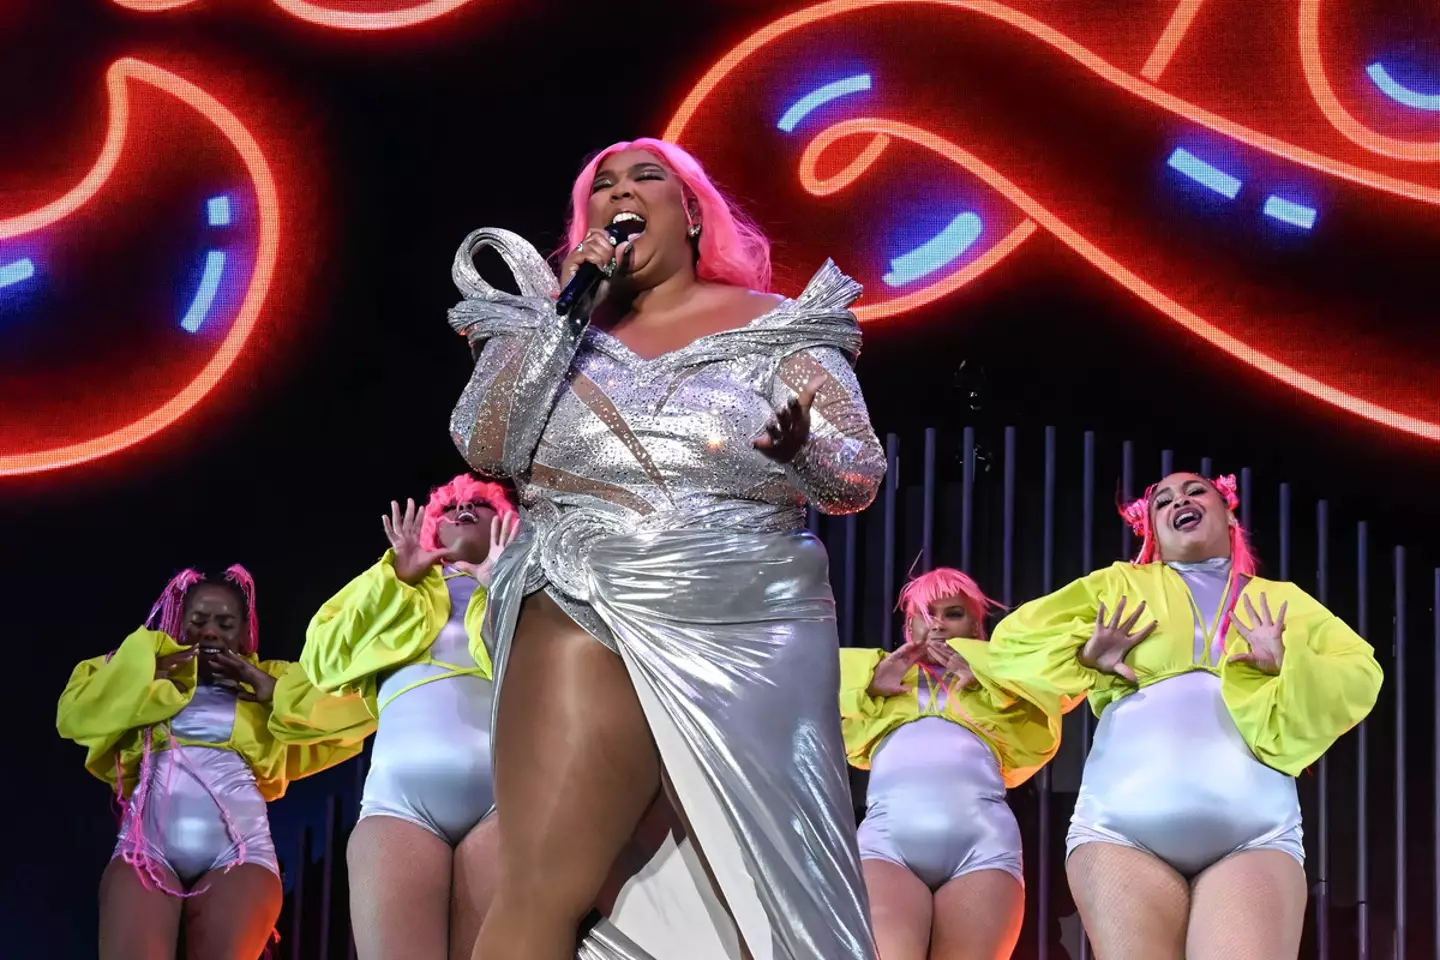 On the same day of the Beyoncé concert, Lizzo - real name Melissa Viviane Jefferson - and her production company were sued by three former dancers over alleged sexual harassment and a 'hostile work environment'.